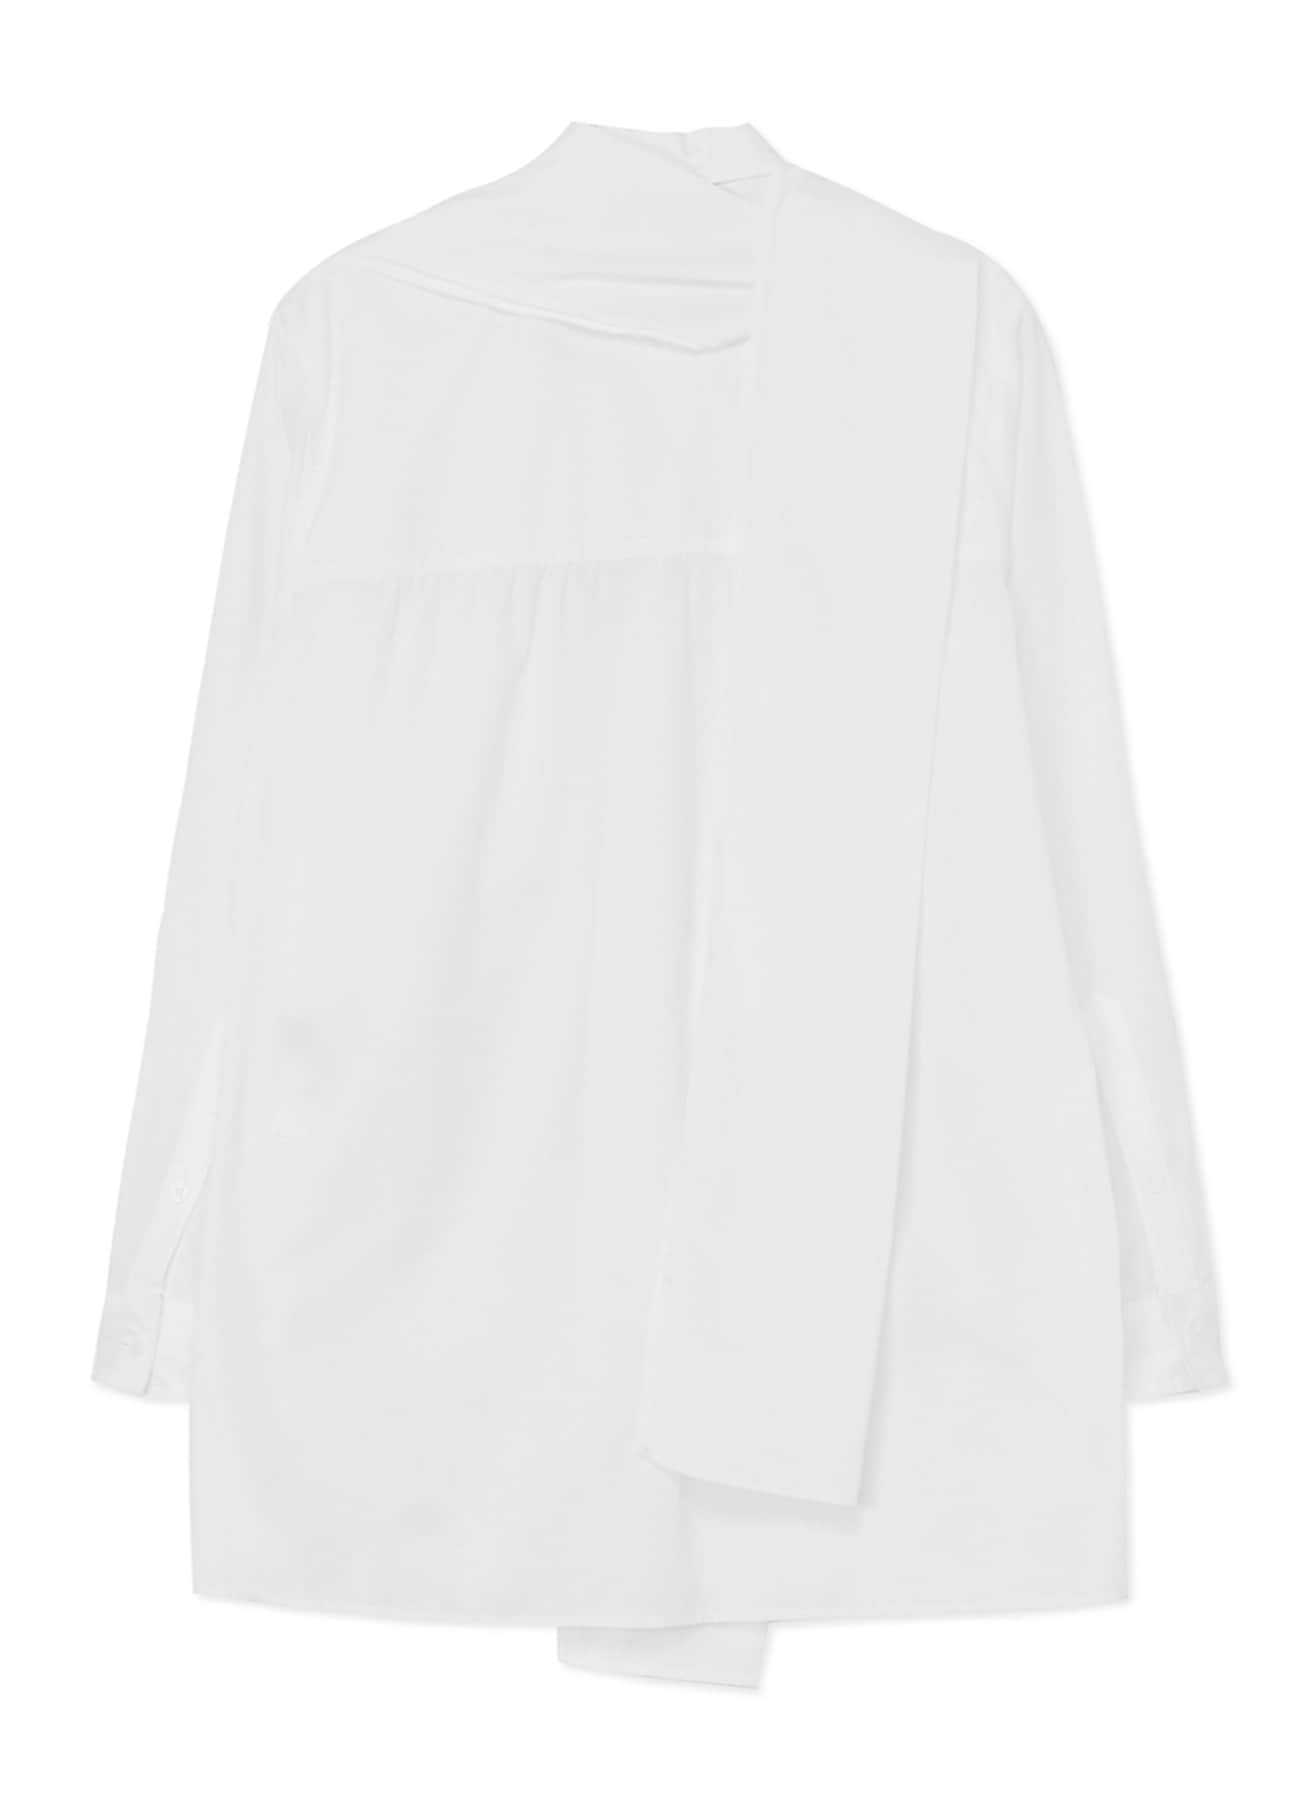 COTTON BROADCLOTH SHIRT WITH STOLE(S White): power of the WHITE 